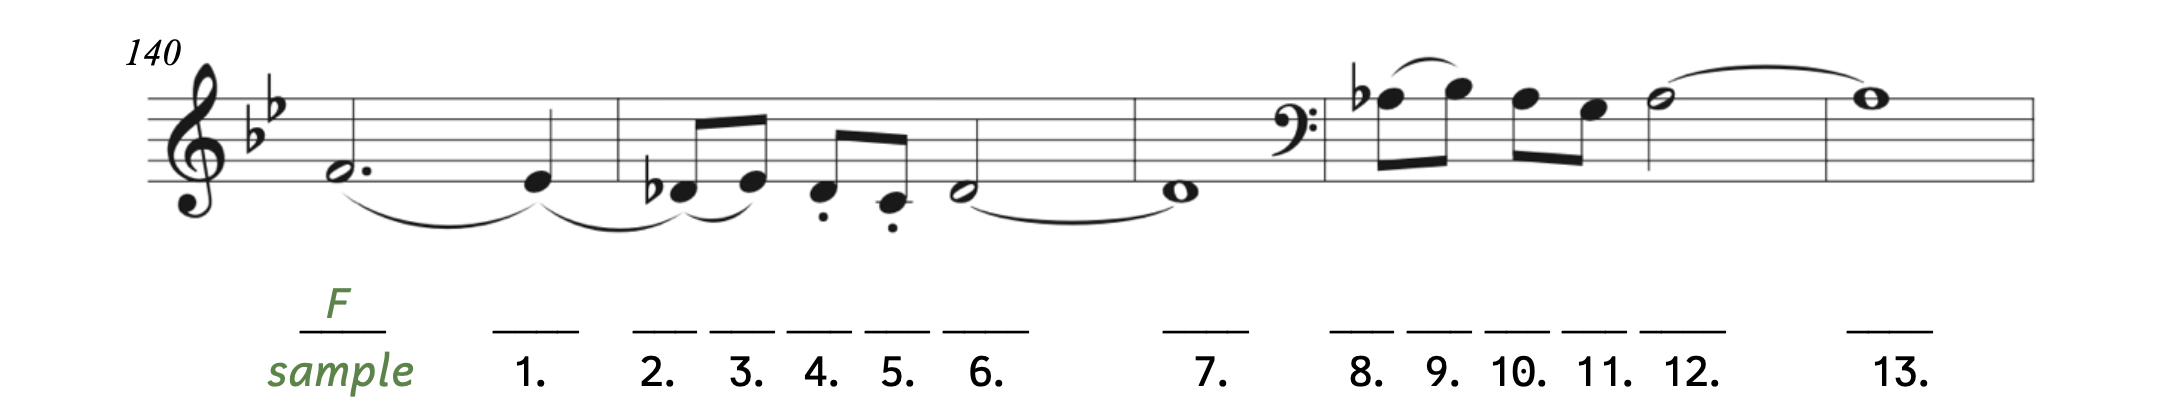 The example begins in the treble clef with two flats. The sample shows F. Number 1 looks like E. There is a bar line. Number 2 looks like D-flat. Number 3 looks like E. Number 4 looks like D. Number 5 looks like C. Number 6 looks like D and is tied across the bar line to number 7. There is another bar line and the clef changes to bass clef. Number 8 looks like A. Number 9 looks like B. Number 10 looks like A. Number 11 looks like G. Number 12 looks like A and is tied across the bar line to number 13.